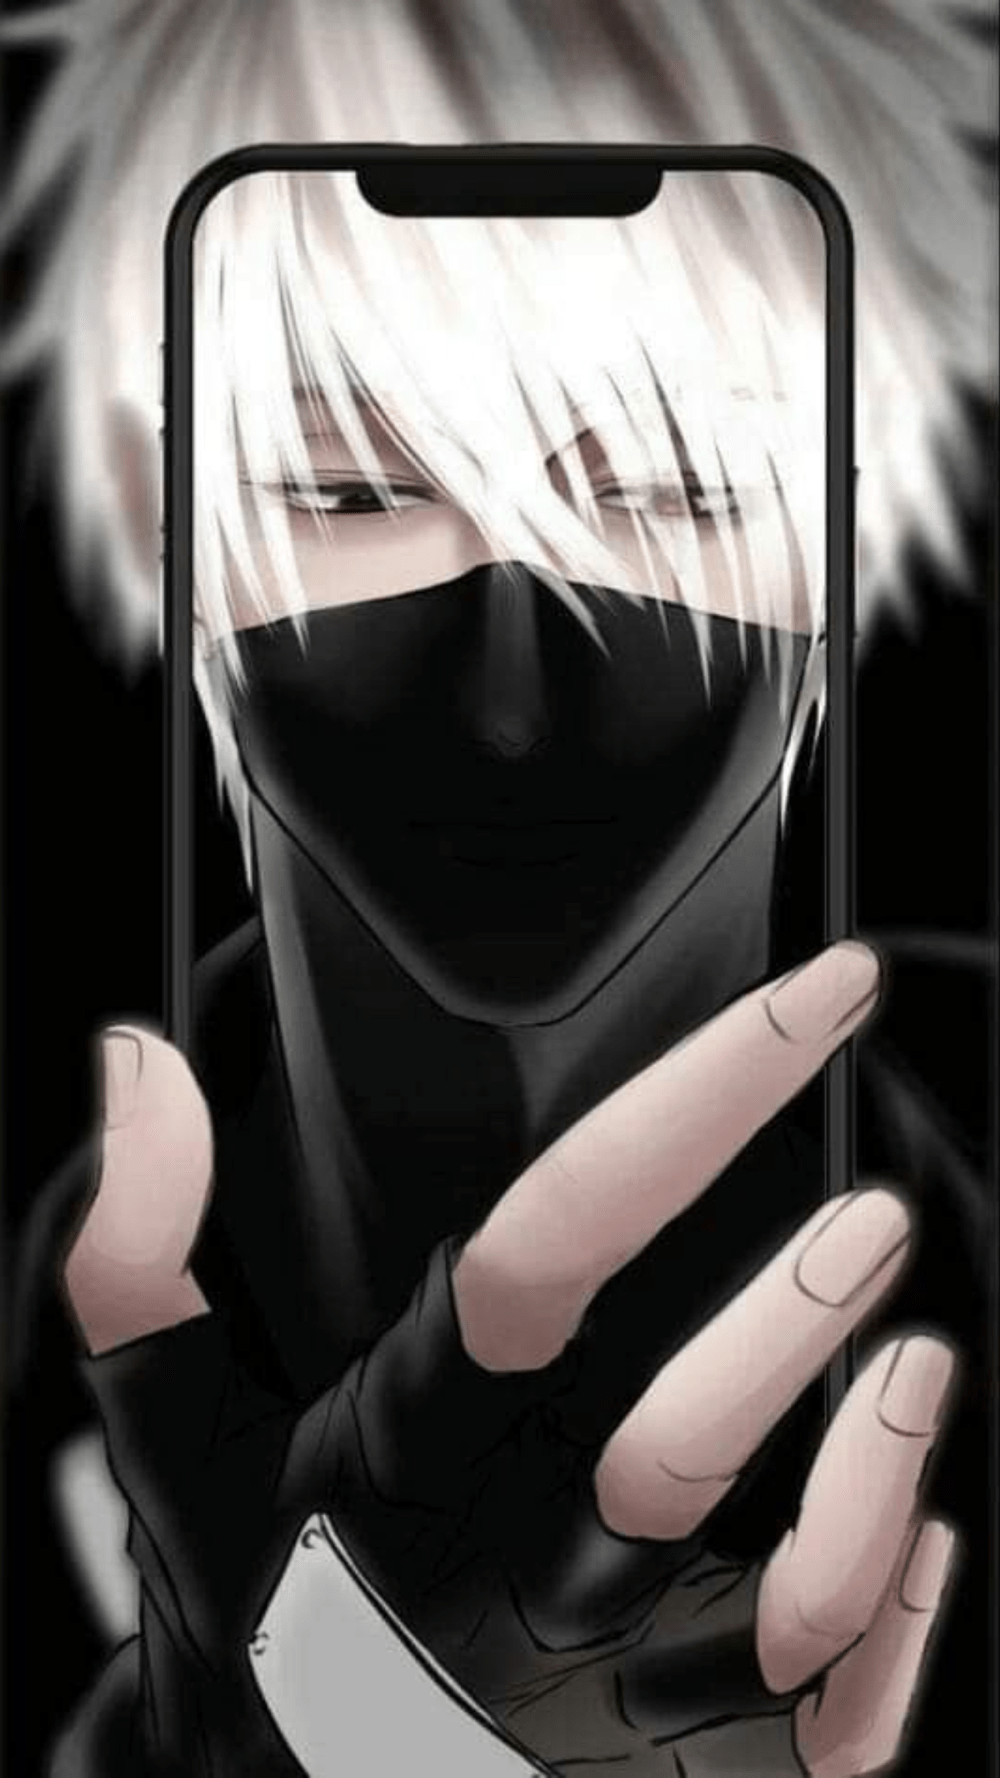 A black and white anime character with white hair holding a phone. - Kakashi Hatake